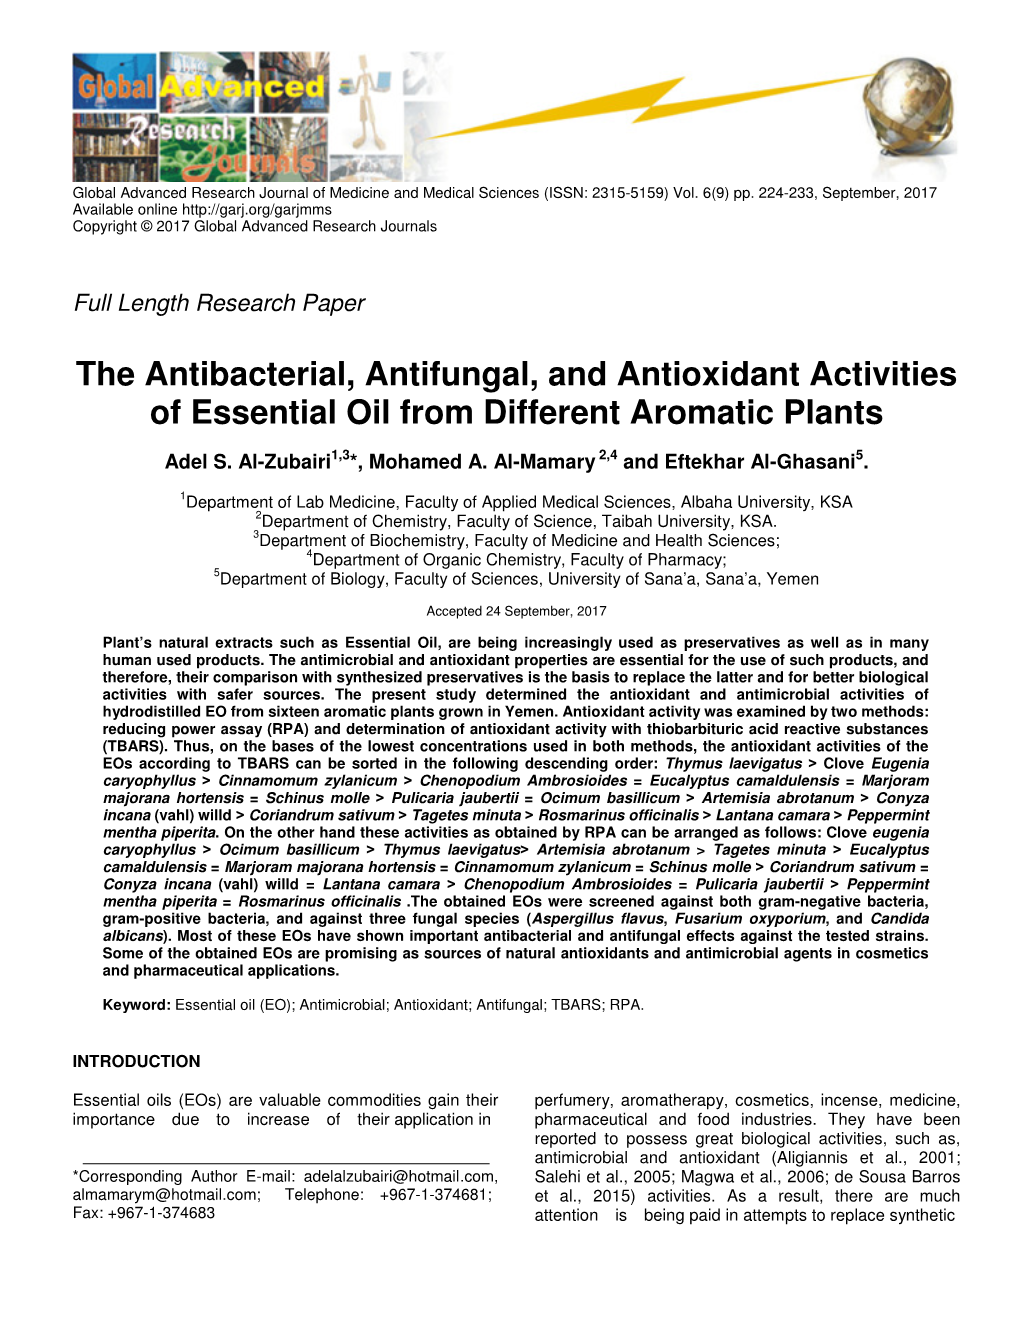 The Antibacterial, Antifungal, and Antioxidant Activities of Essential Oil from Different Aromatic Plants